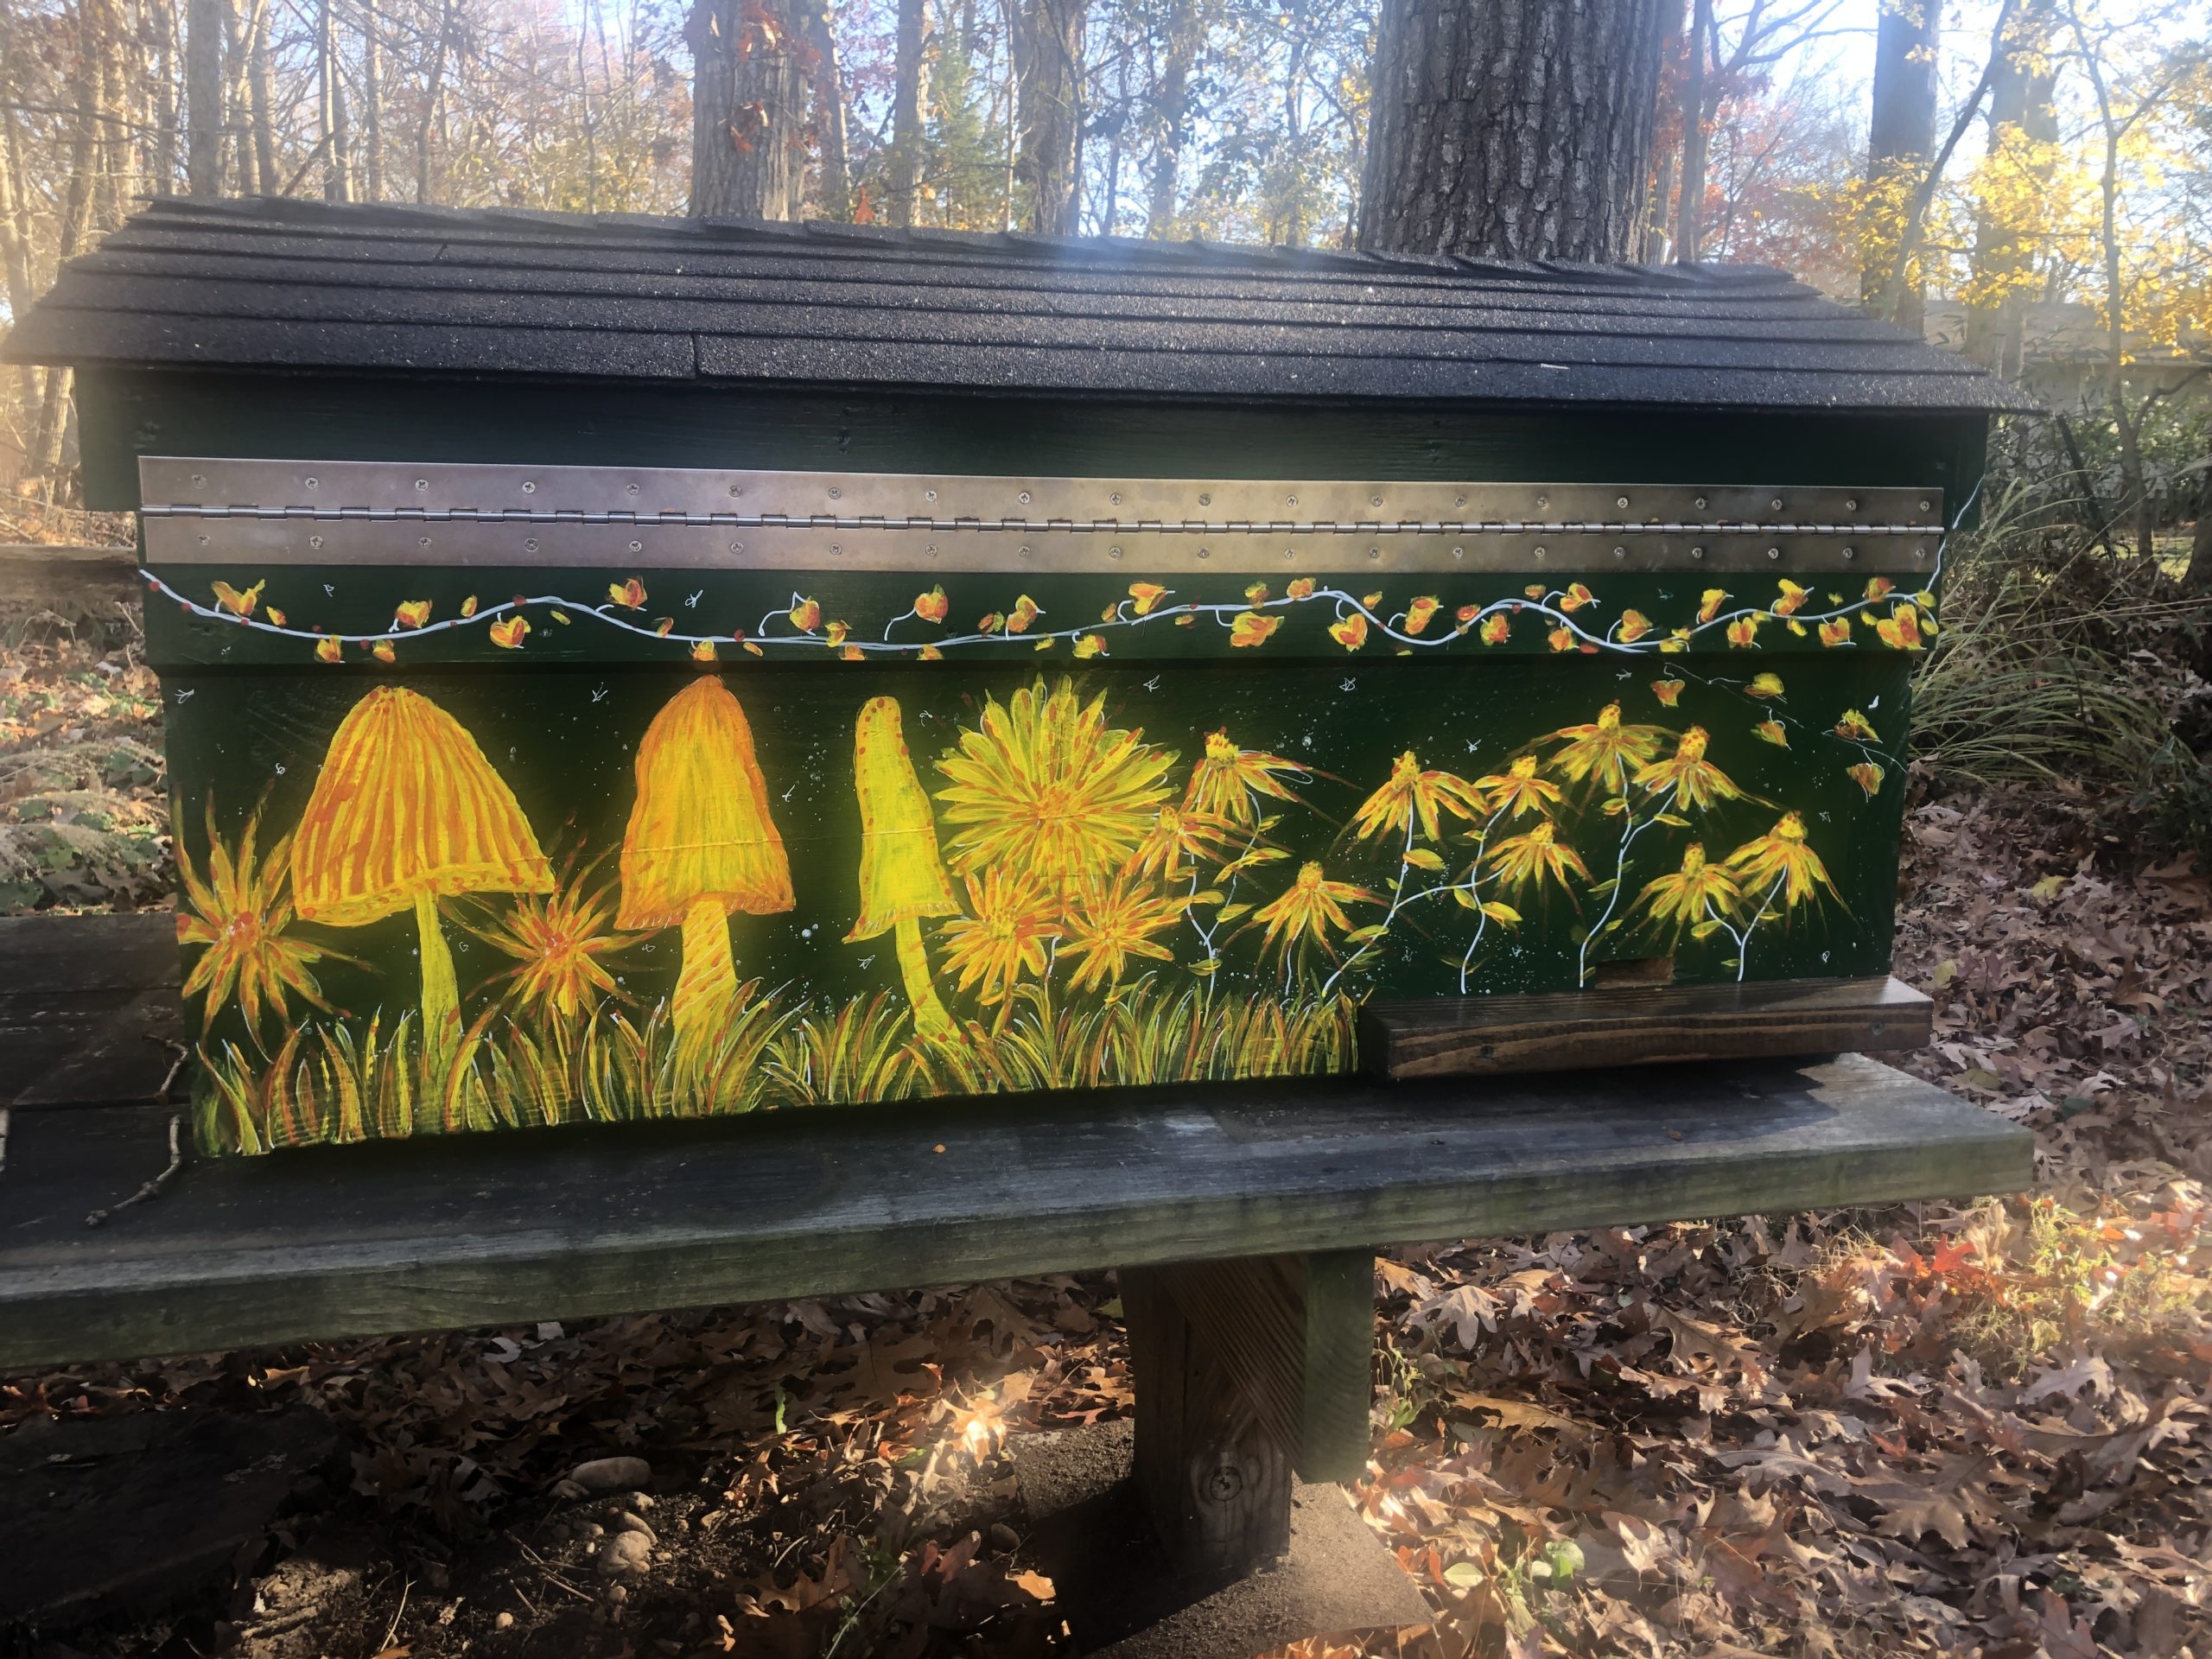 The Langstroth long hive offers a broad canvas for bee-friendly art.